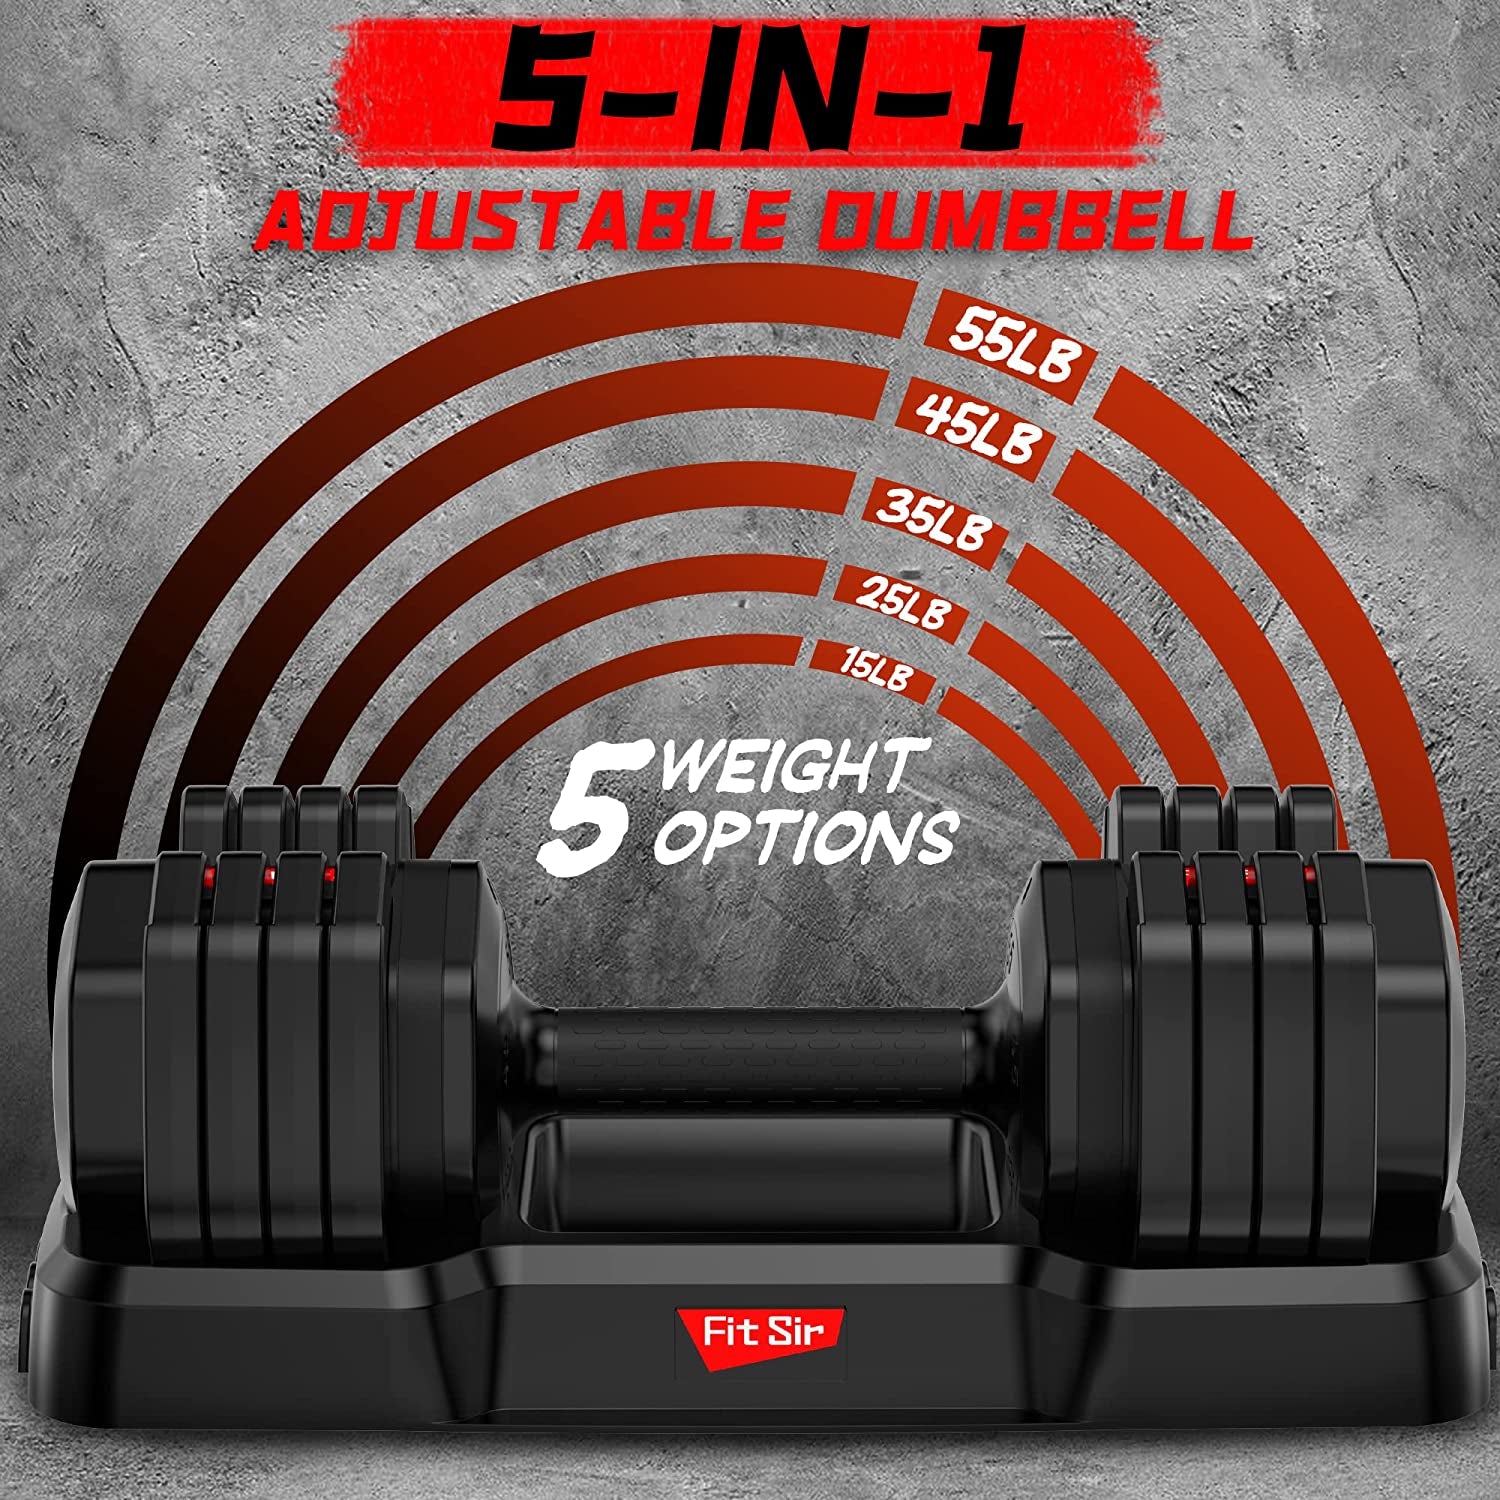 Single Adjustable Dumbbell 55LB,  Weights Dumbbells Set 15~55Lb Increment with Tray and Anti-Slip Handle for Men Women Full Body Workout Exercise & Fitness Strength Training Home Gym